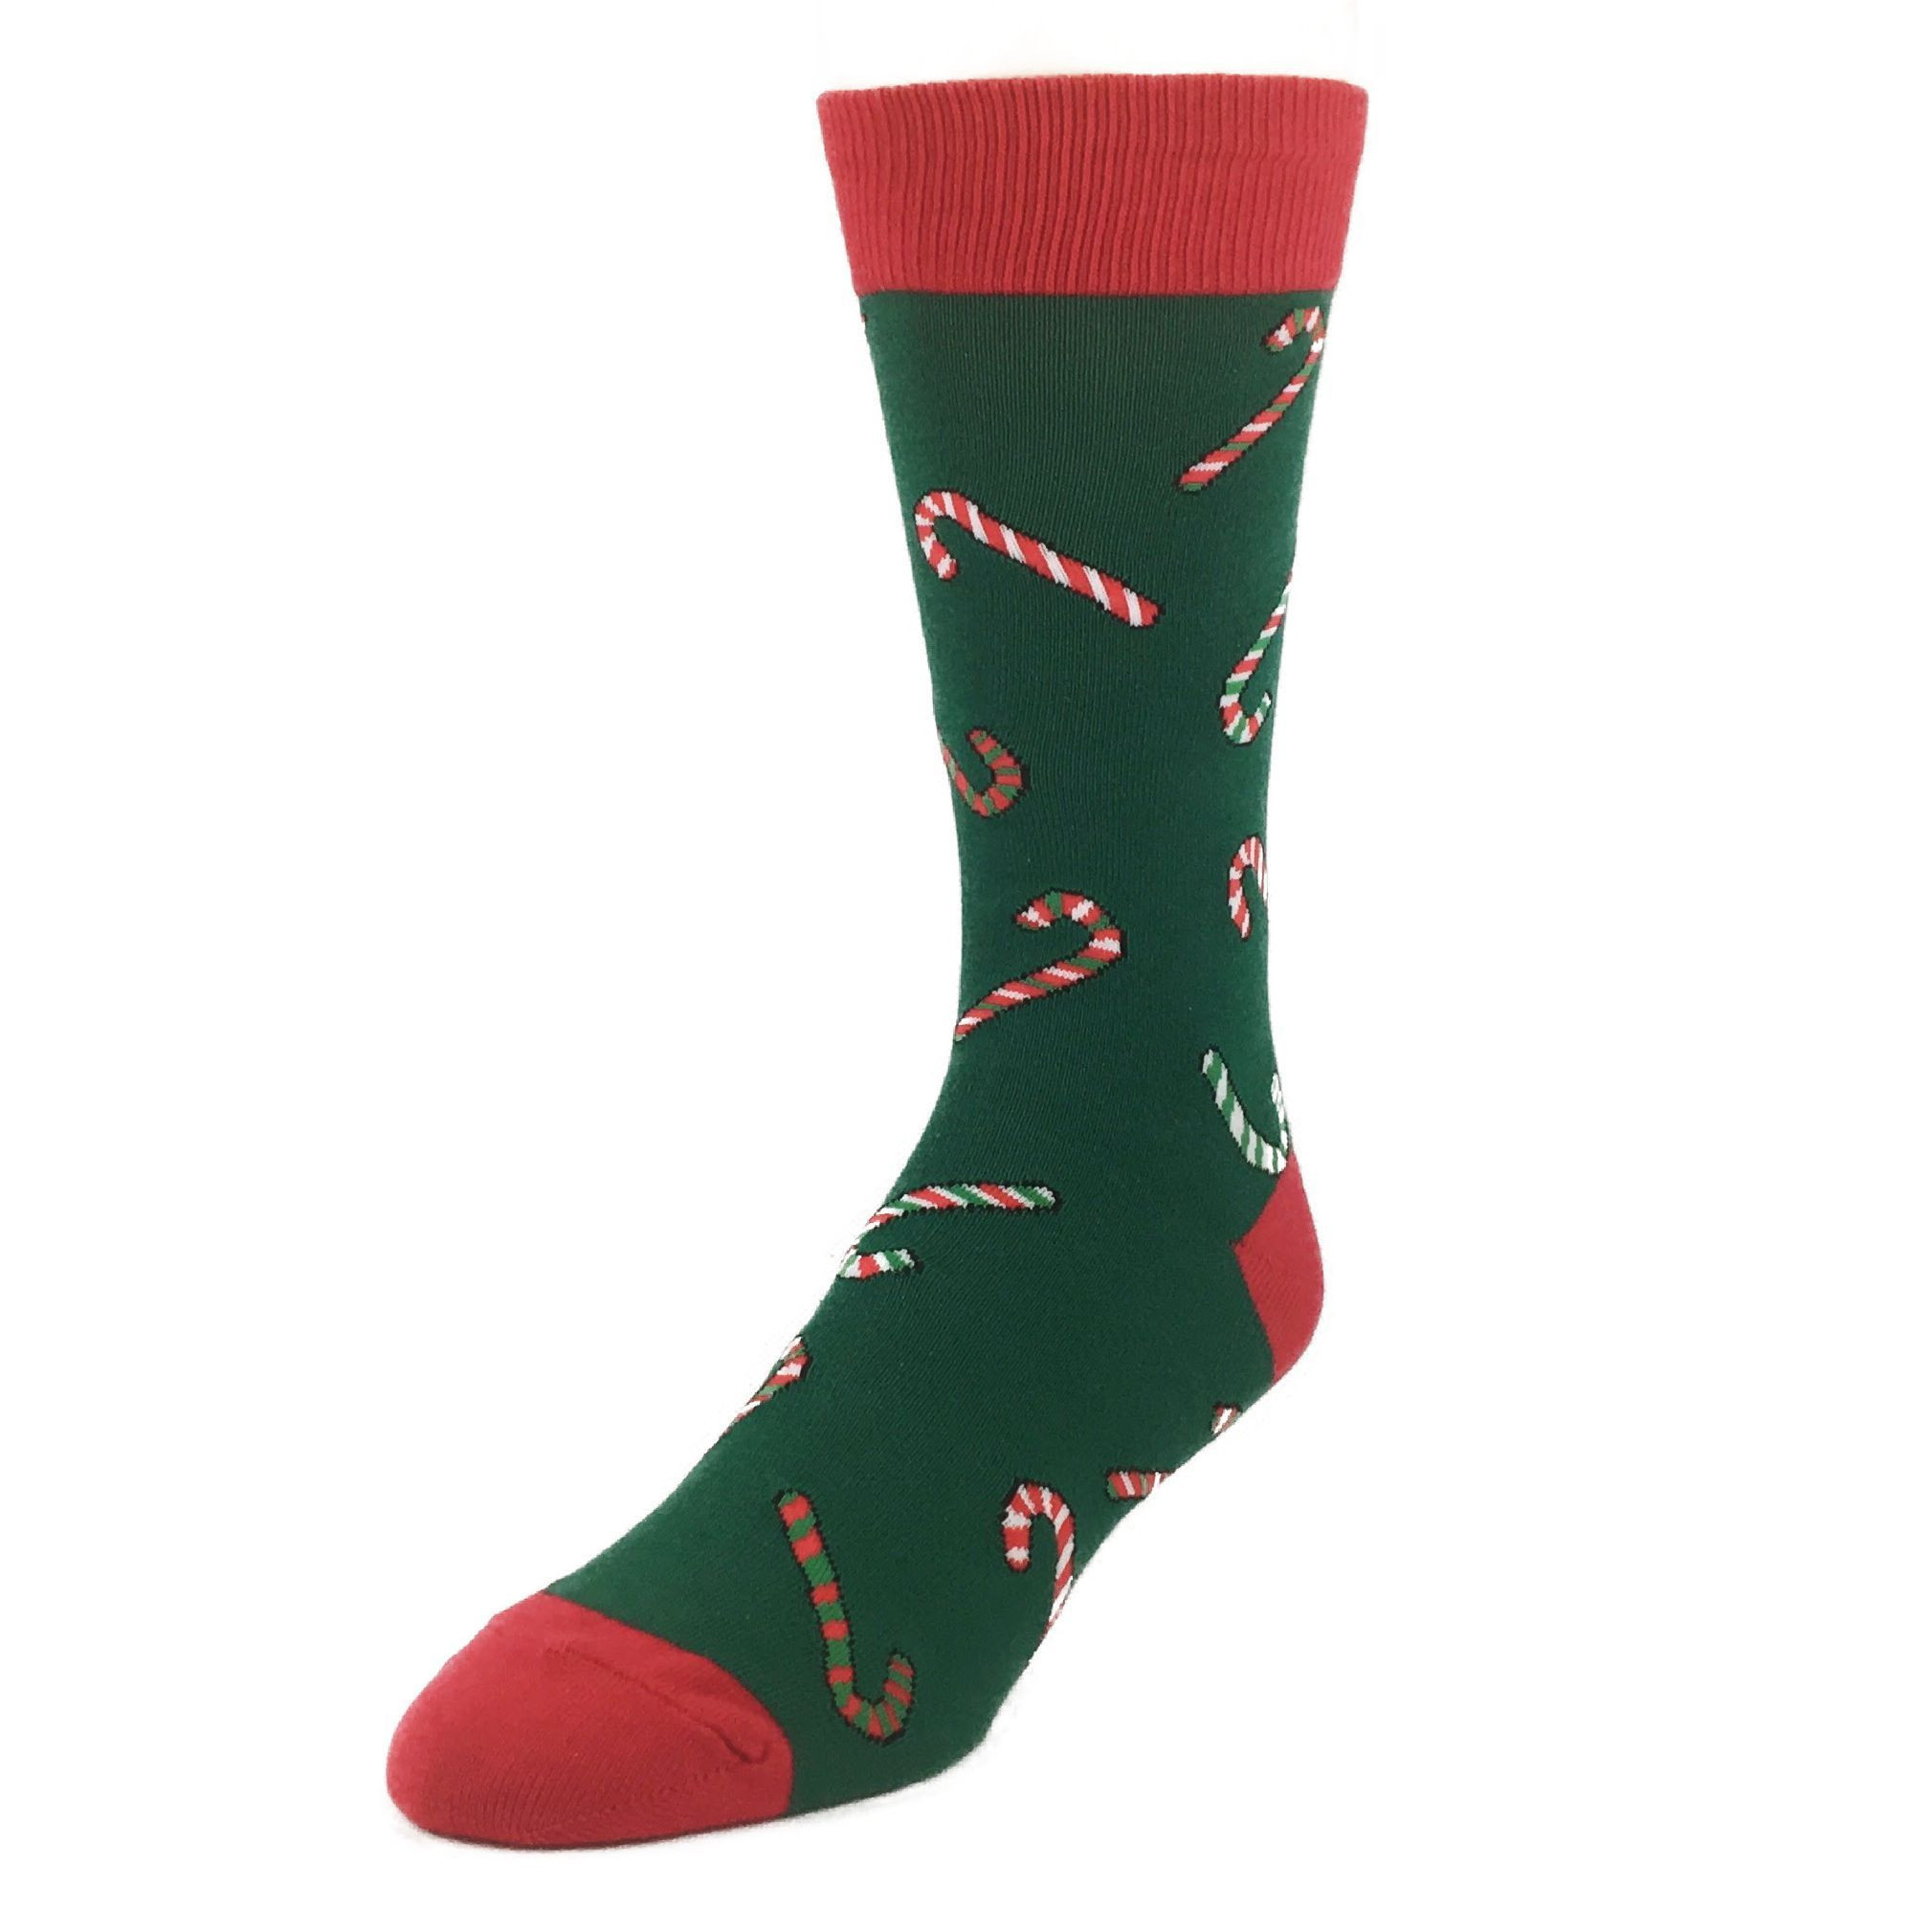 Candy Cane Christmas Shop
 Candy Cane Christmas Socks in Green by SockSmith